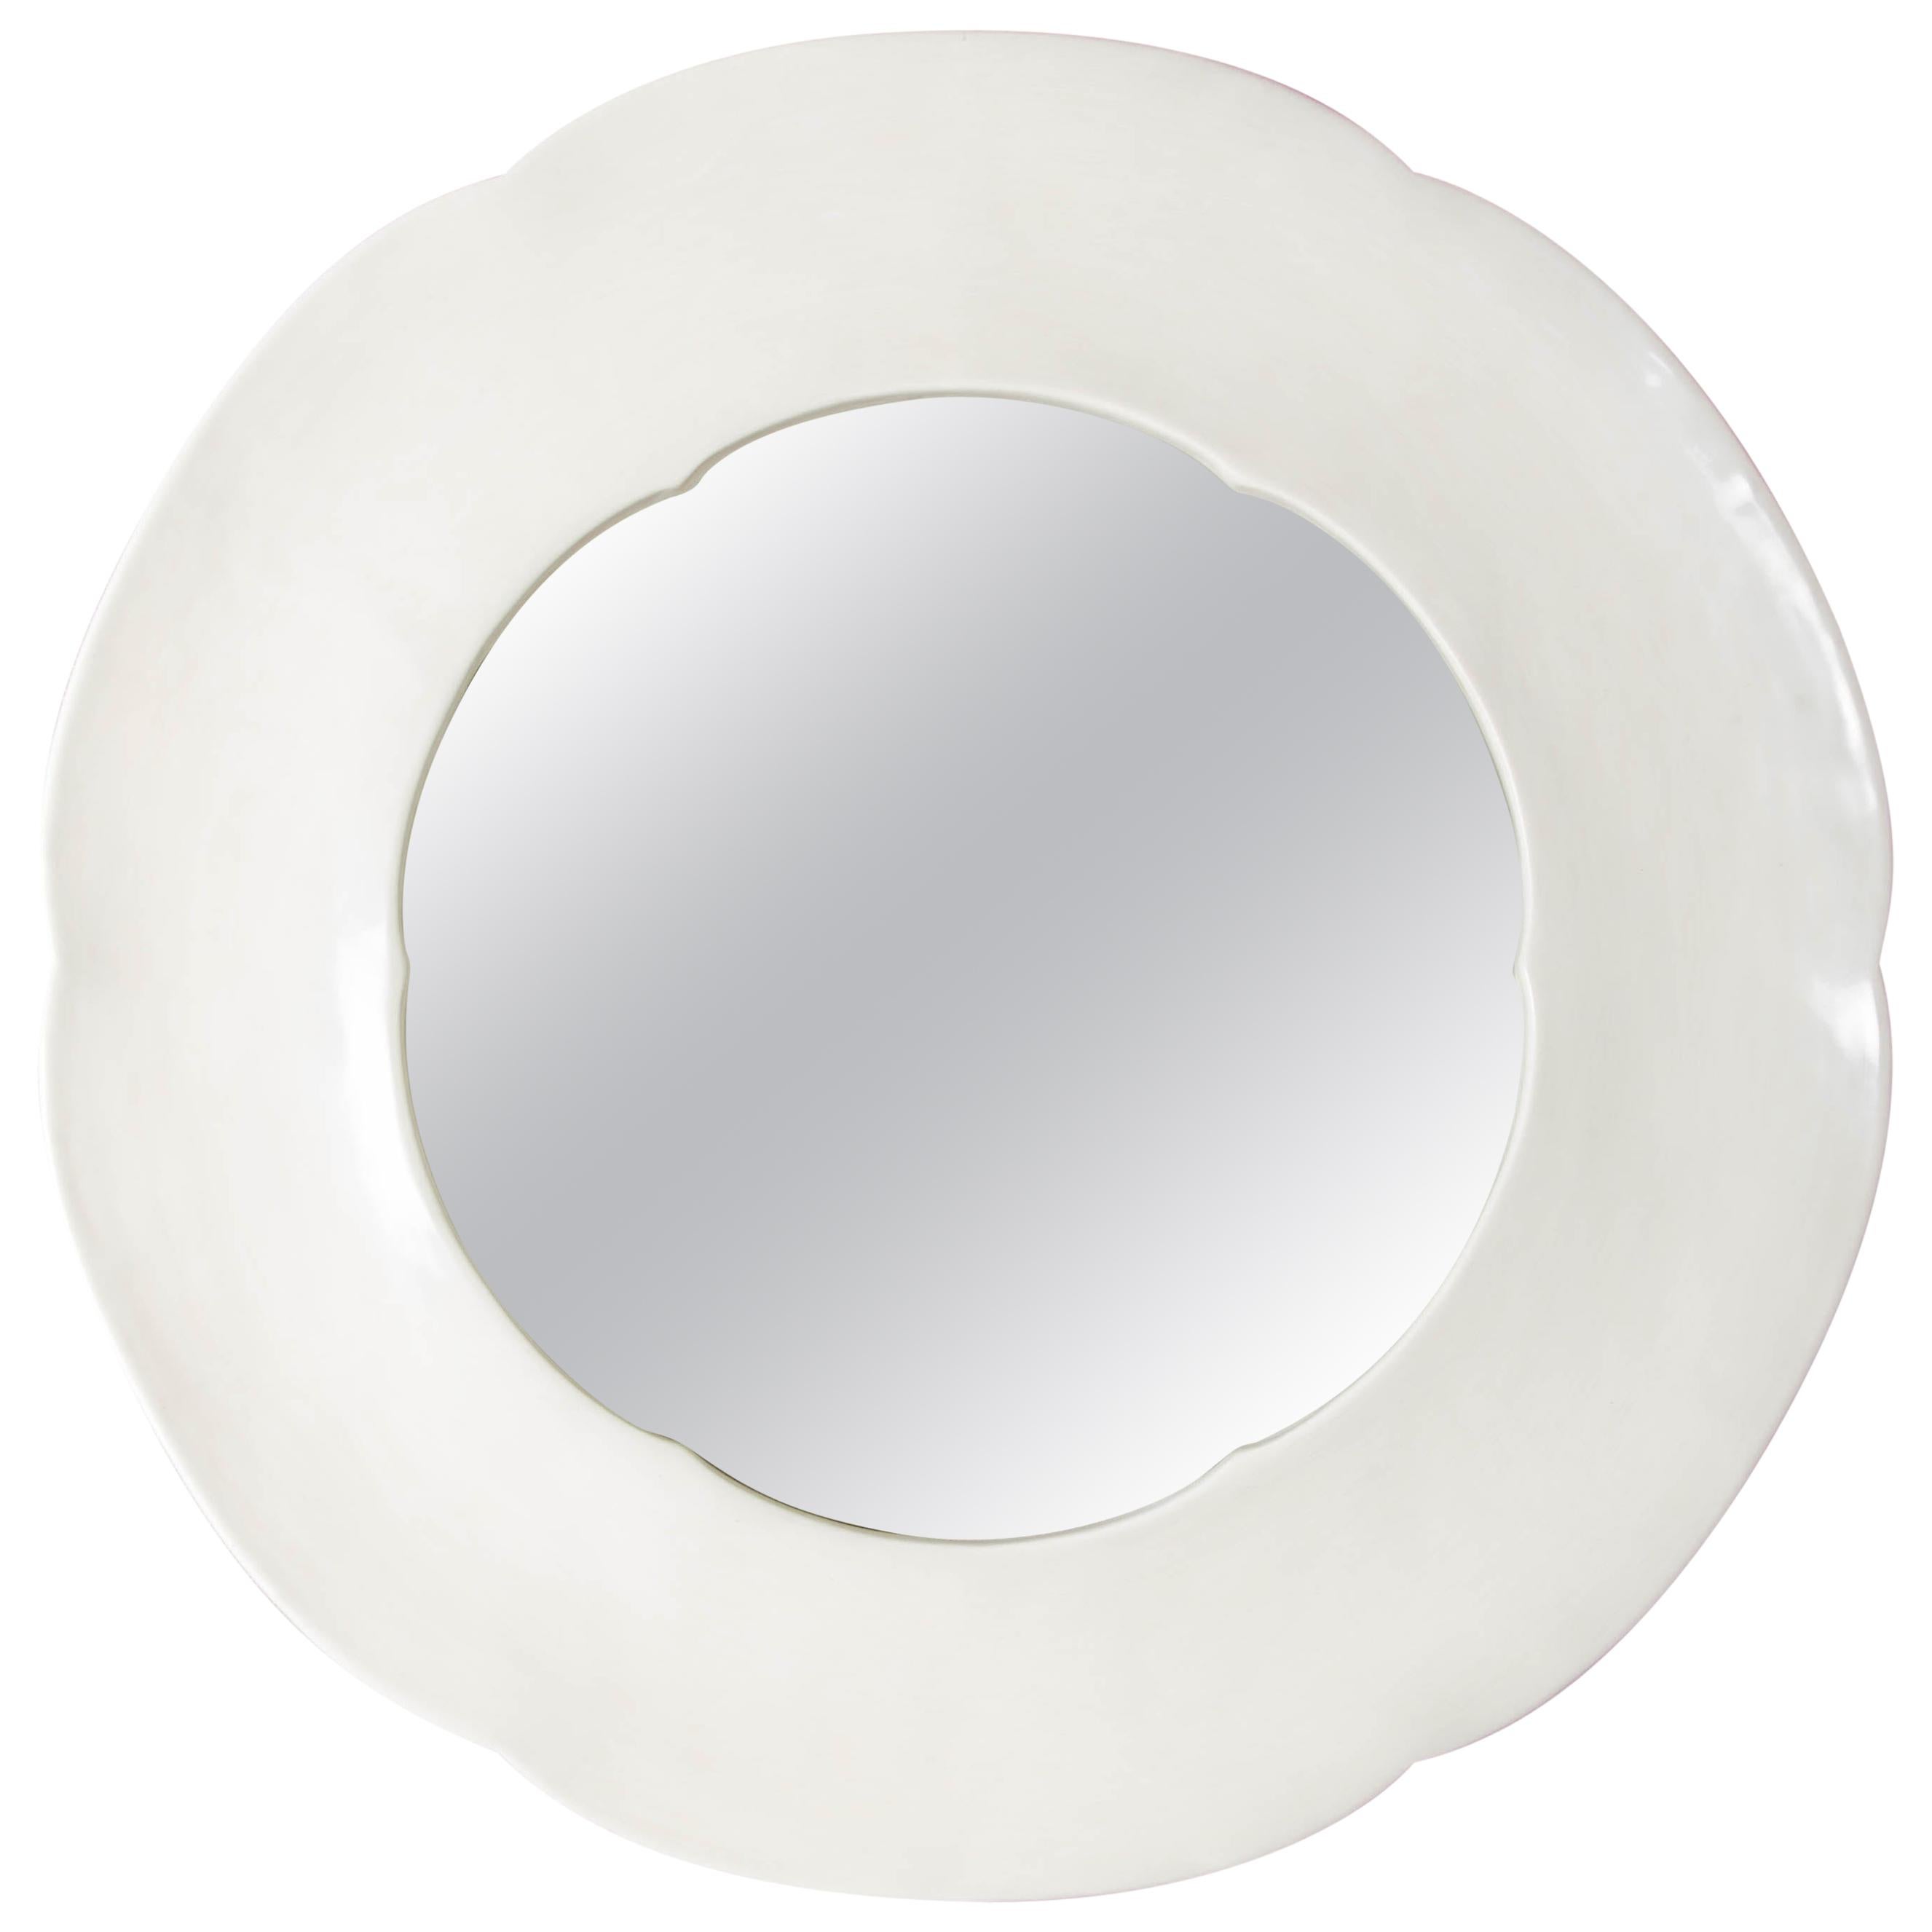 Six Petal Mirror, Cream Lacquer by Robert Kuo, Limited Edition